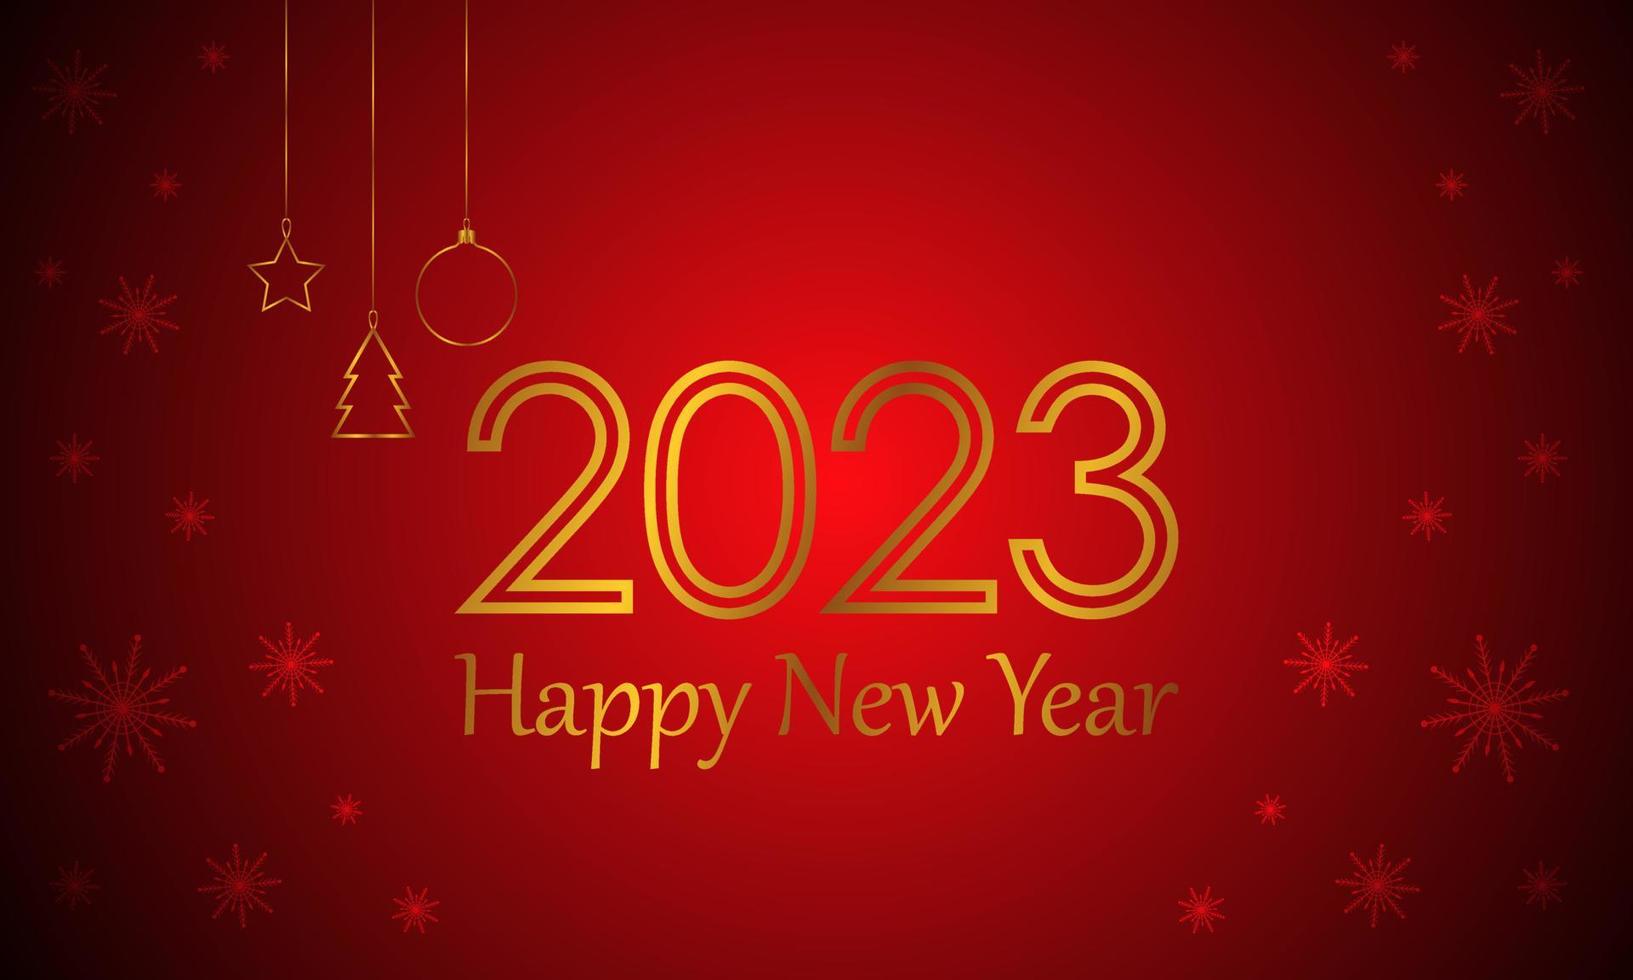 Happy New Year 2023. Festive banner with golden numbers on a red background with snowflakes. Vector illustration